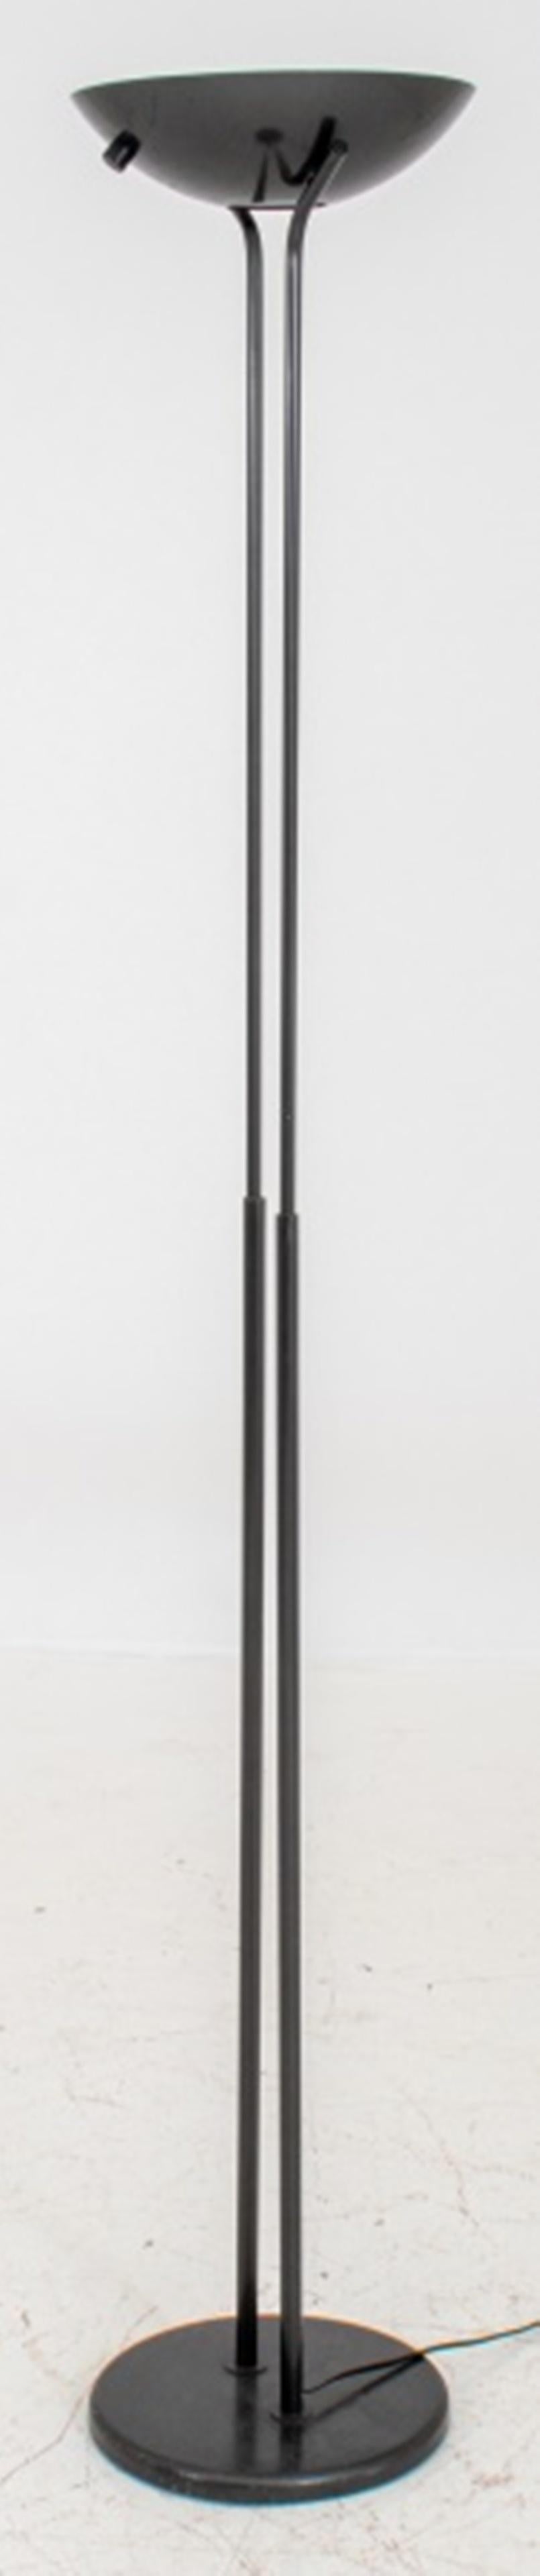 Italian Postmodern halogen torchiere floor lamp with enameled metal structure. In very good vintage condition. 
Dealer: S138XX